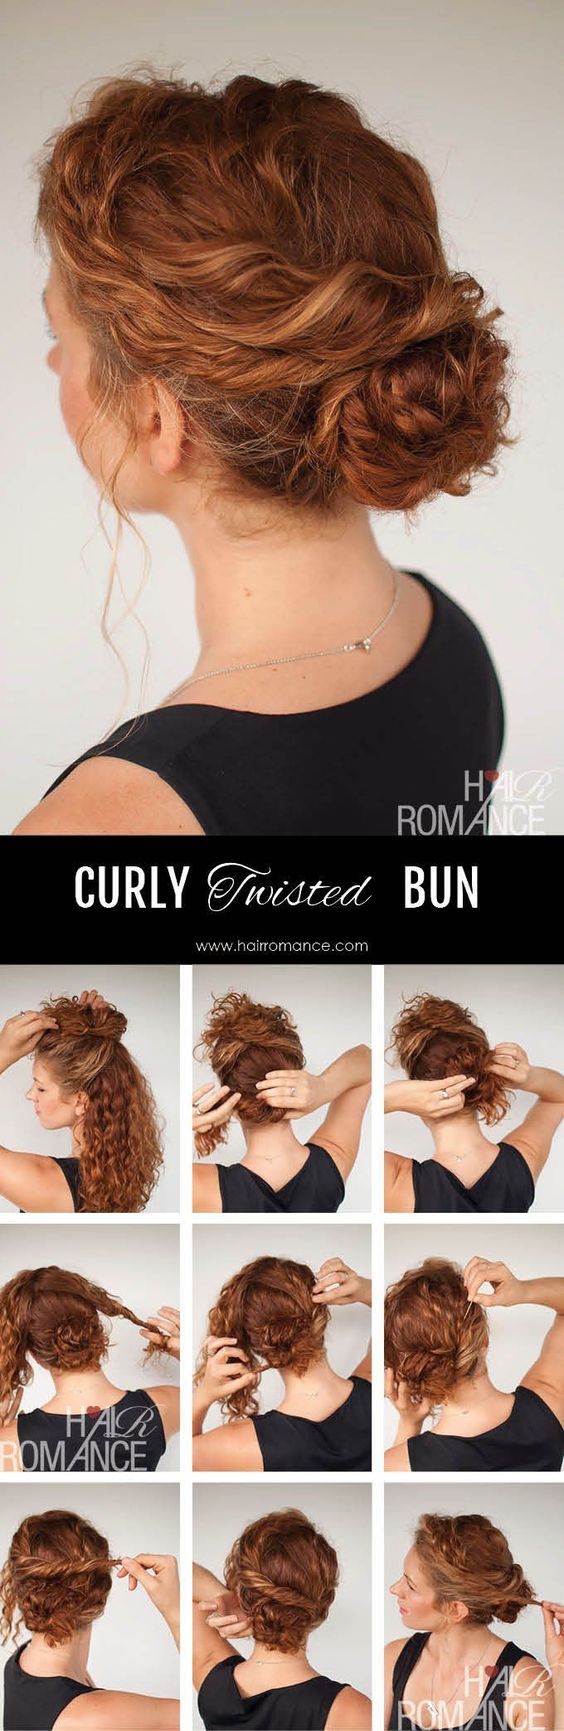 Curly twisted bun over